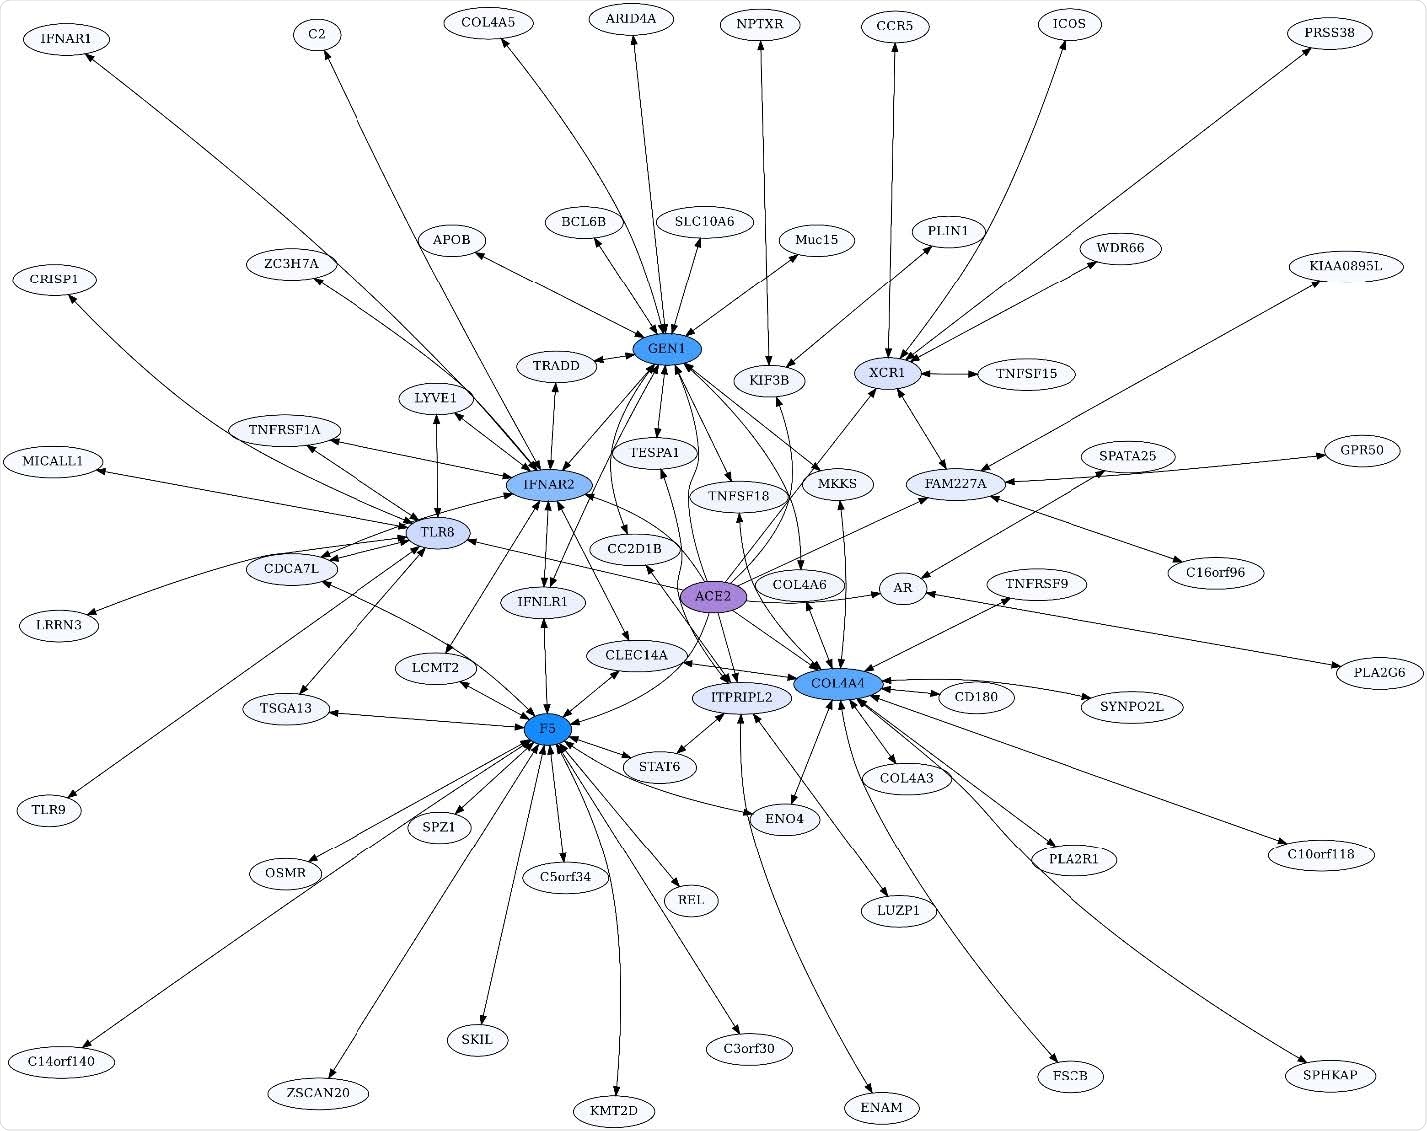 ACE2 Unidirectional Reciprocal Rank (URR) Network. ACE2’s top 10 unidirectional ERC proteins for a web of reciprocal rank (RR20) connections. The network is particularly enriched for cytokine signaling and immunity. Highly interconnected proteins include COL4A5, F5, GEN1, and IFNAR2. ACE2 is highlighted in purple, and blue shading intensity indicates the level of reciprocal connectivity for different proteins.